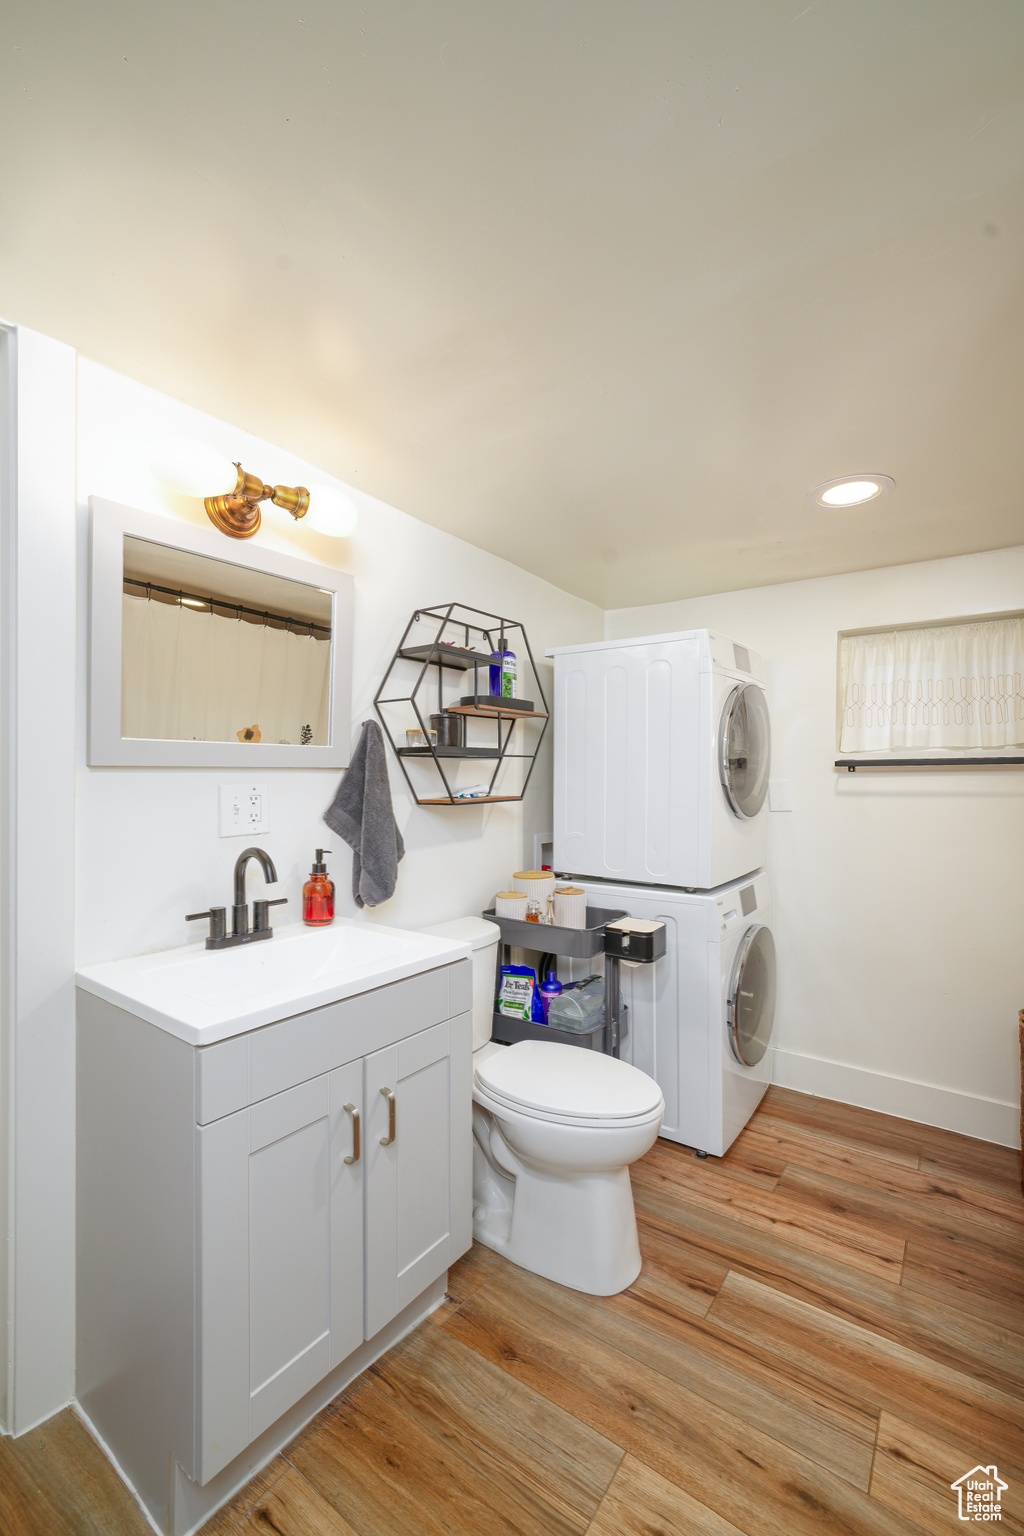 Bathroom featuring laminate flooring, vanity with extensive cabinet space, toilet, and stacked washer and clothes dryer